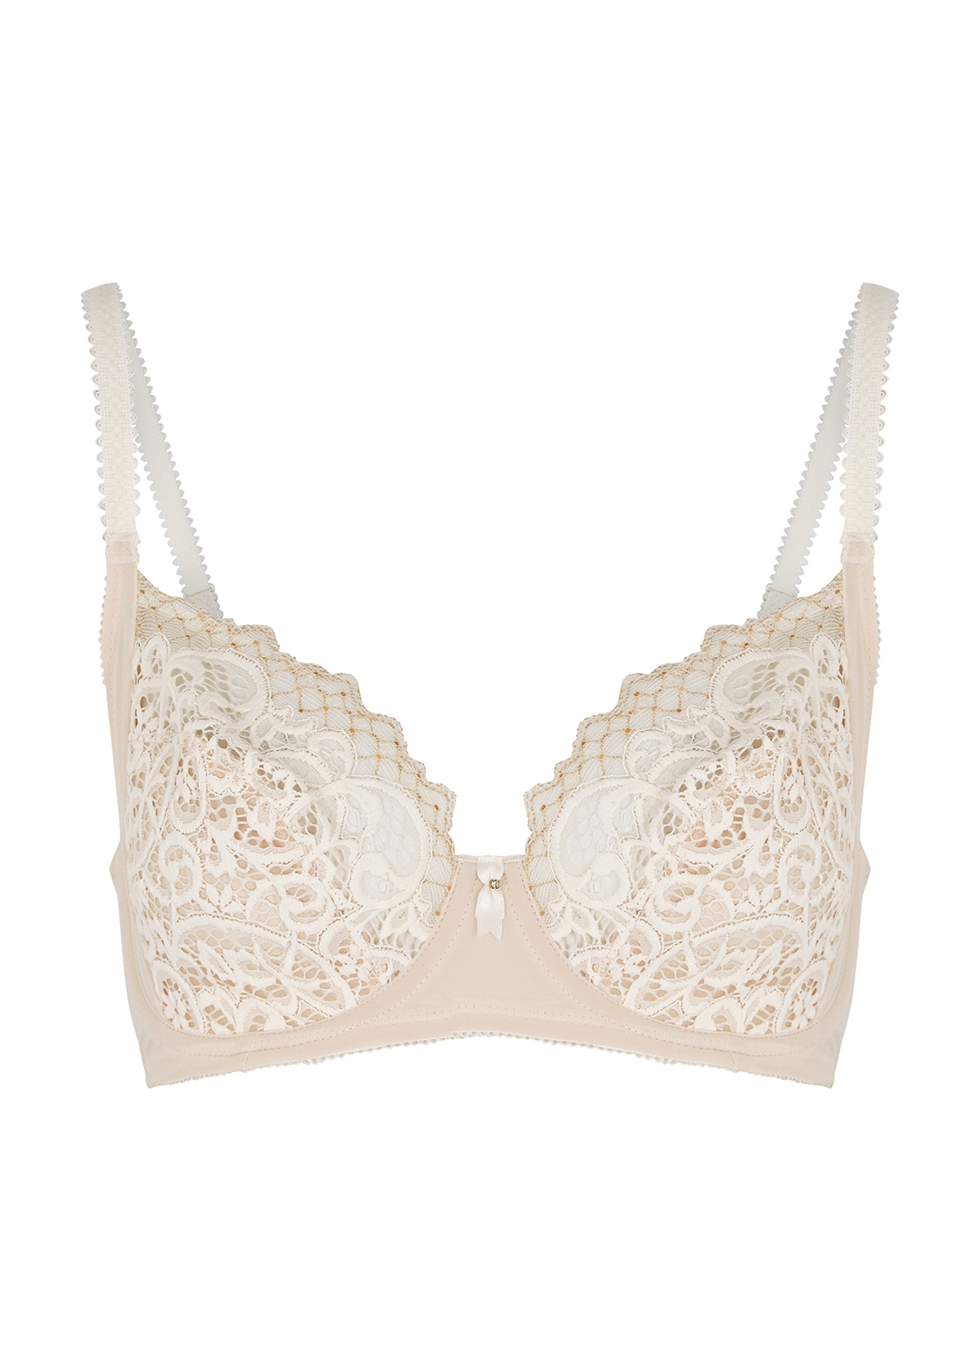 Wacoal Lace Essential ivory underwired bra - D-F cup - Harvey Nichols